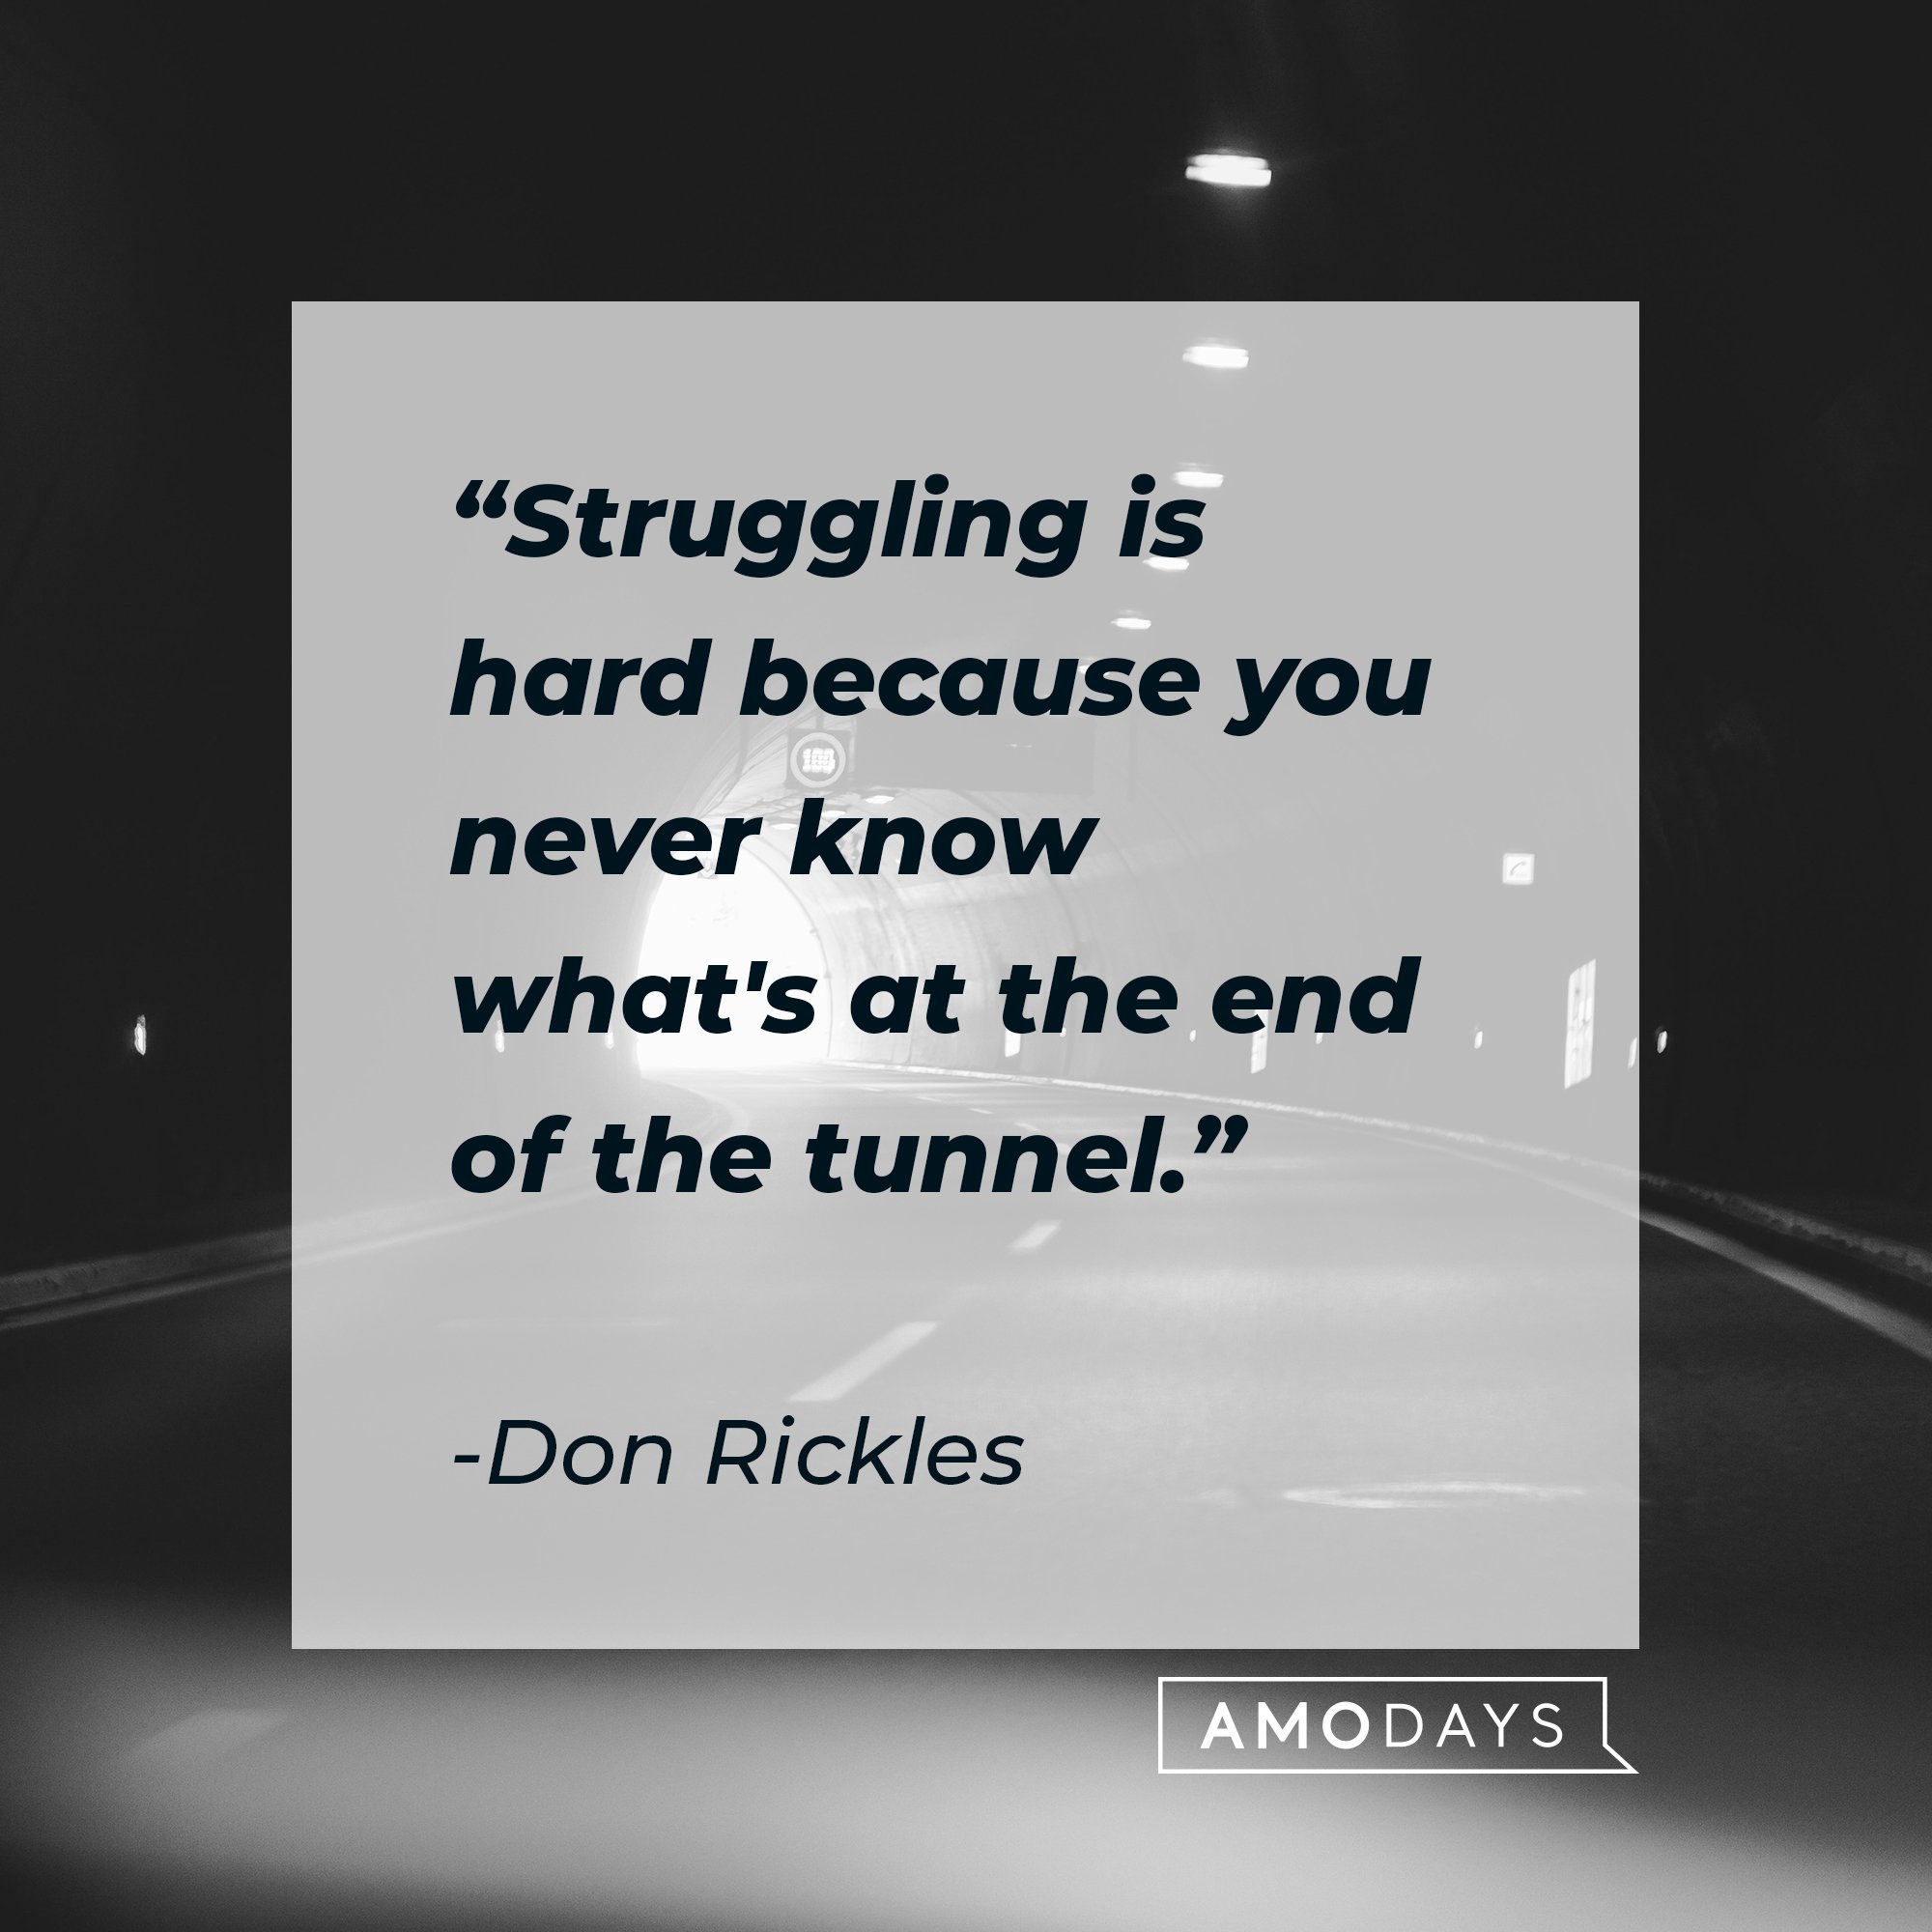 Don Rickles’ quote: "Struggling is hard because you never know what's at the end of the tunnel." | Image: AmoDays